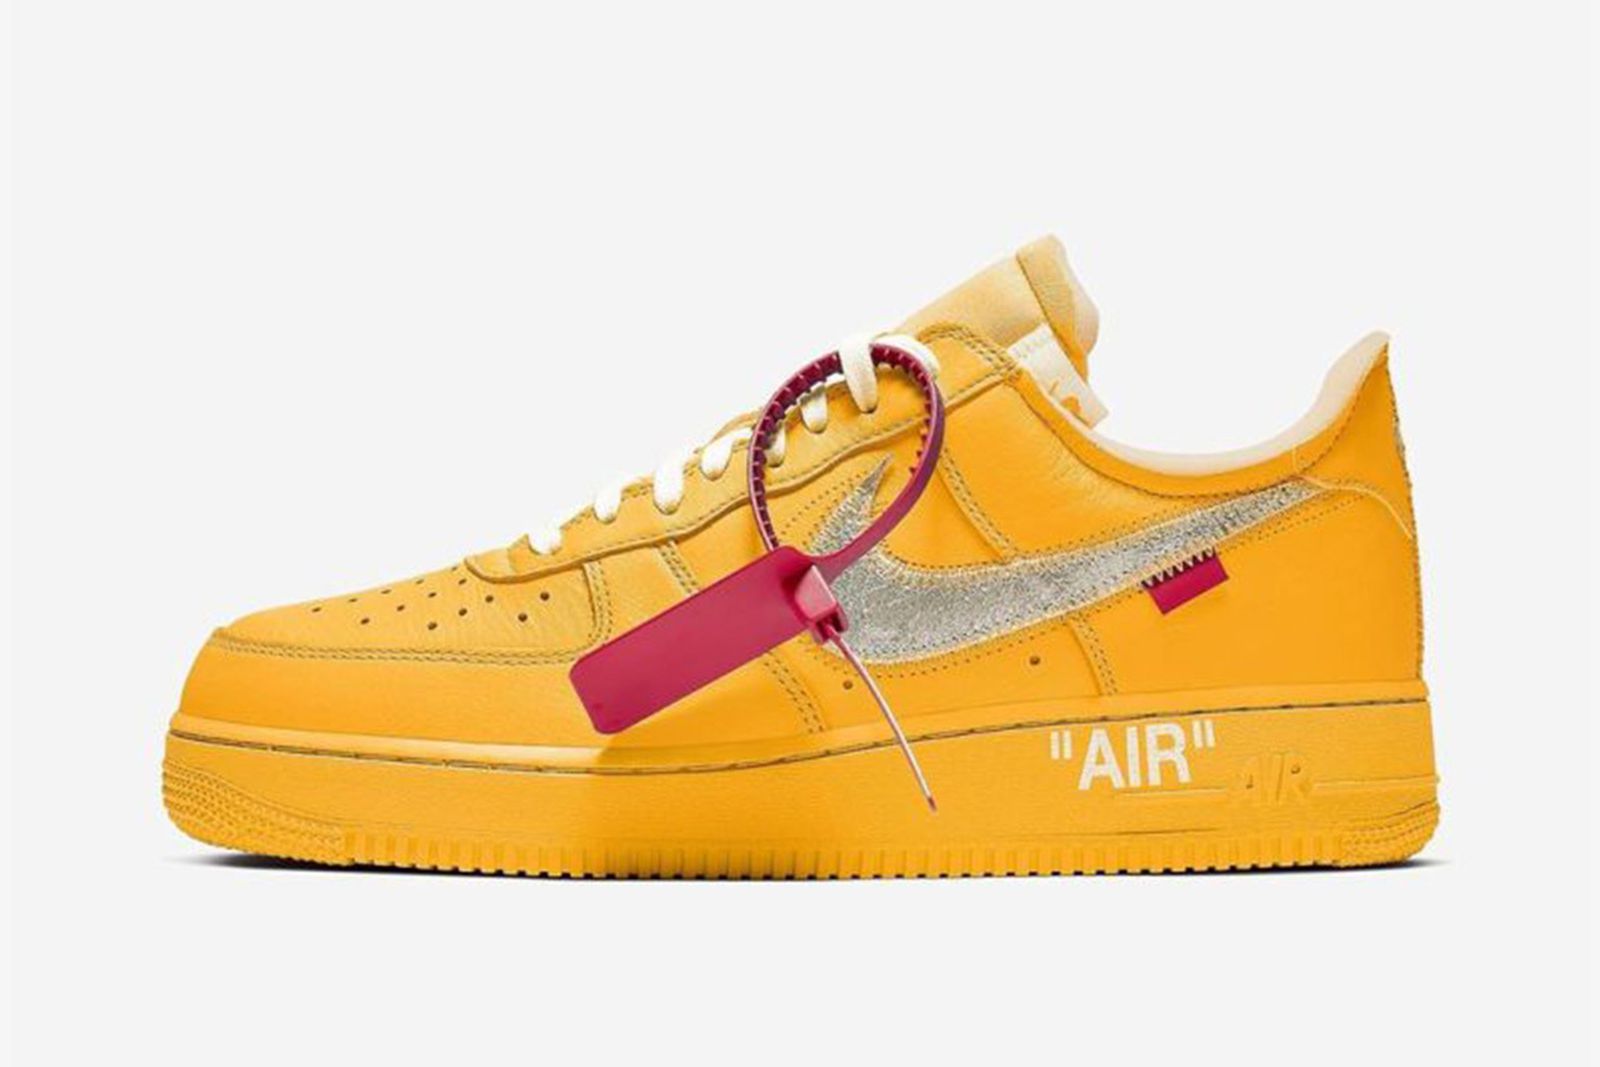 Off-white x Nike Air Force 1 "University Gold"